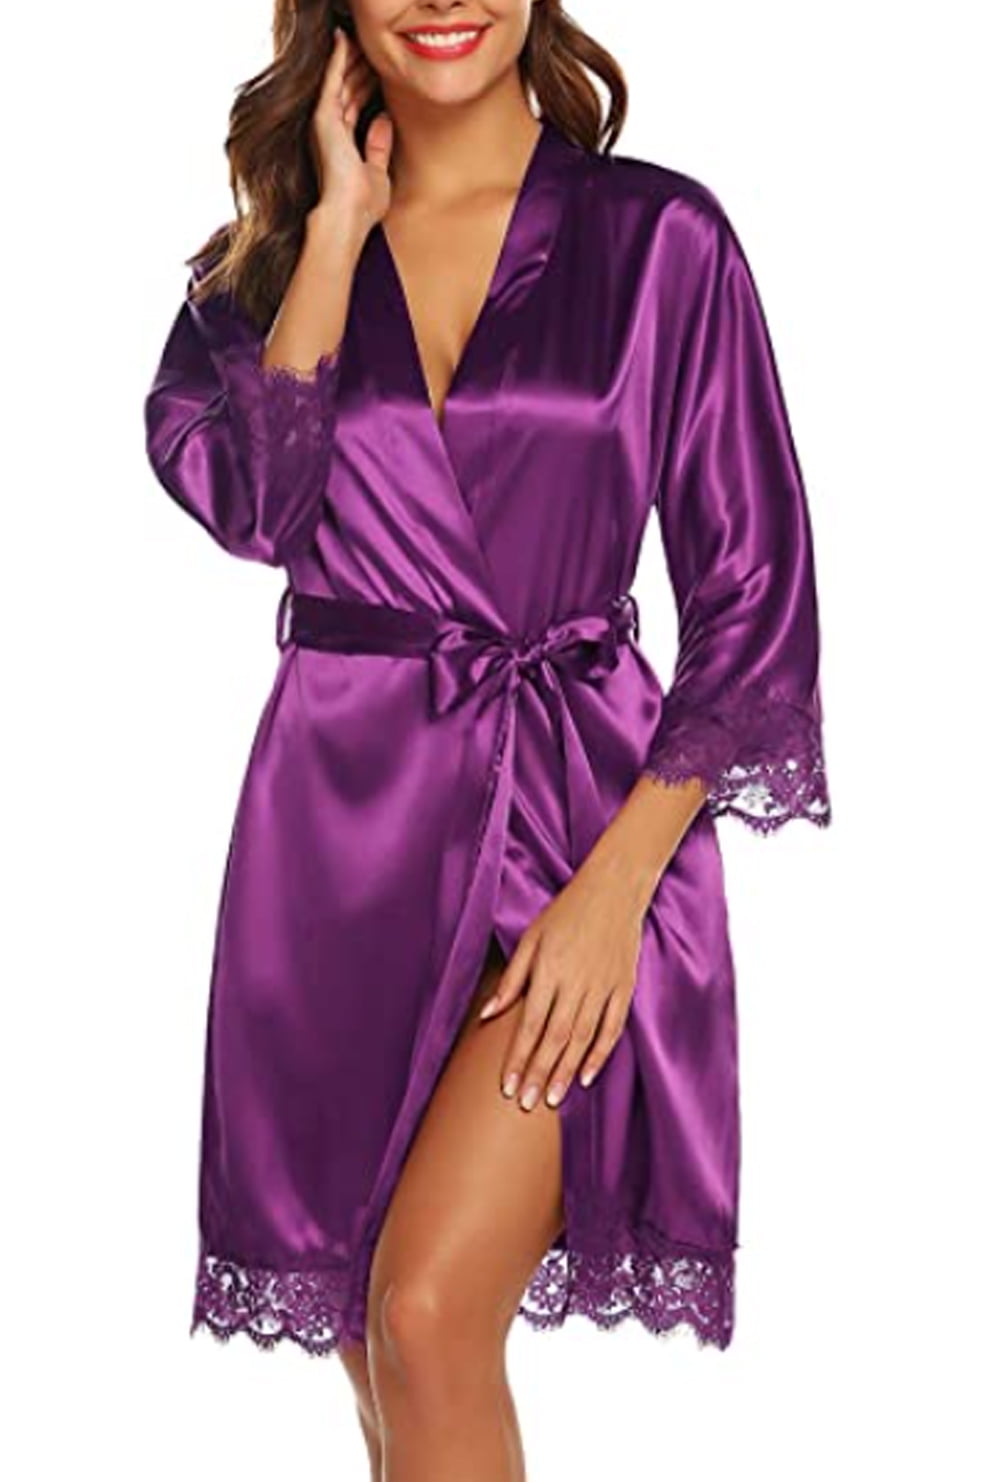 Details about   Womens Short Satin Pure Color Bathrobe Kimono Nightgown Silky Pajama Gown